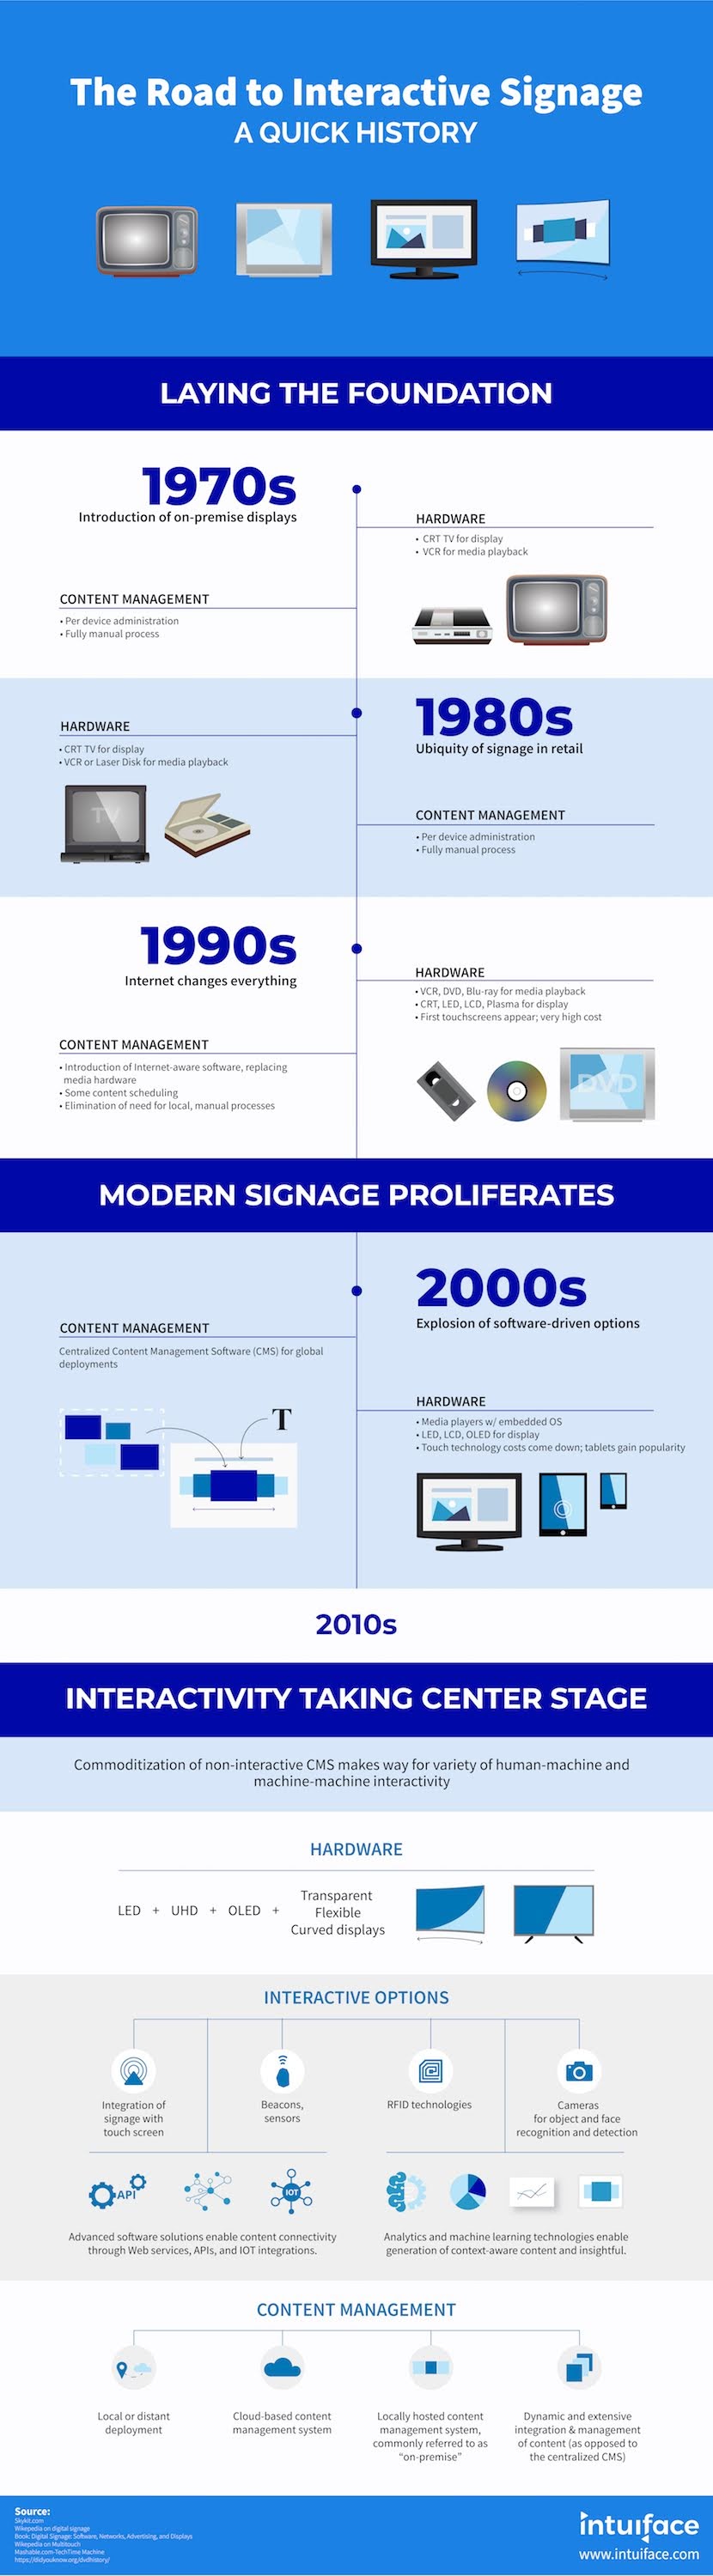 What is Interactive Digital Signage? - A Quick History #infographic